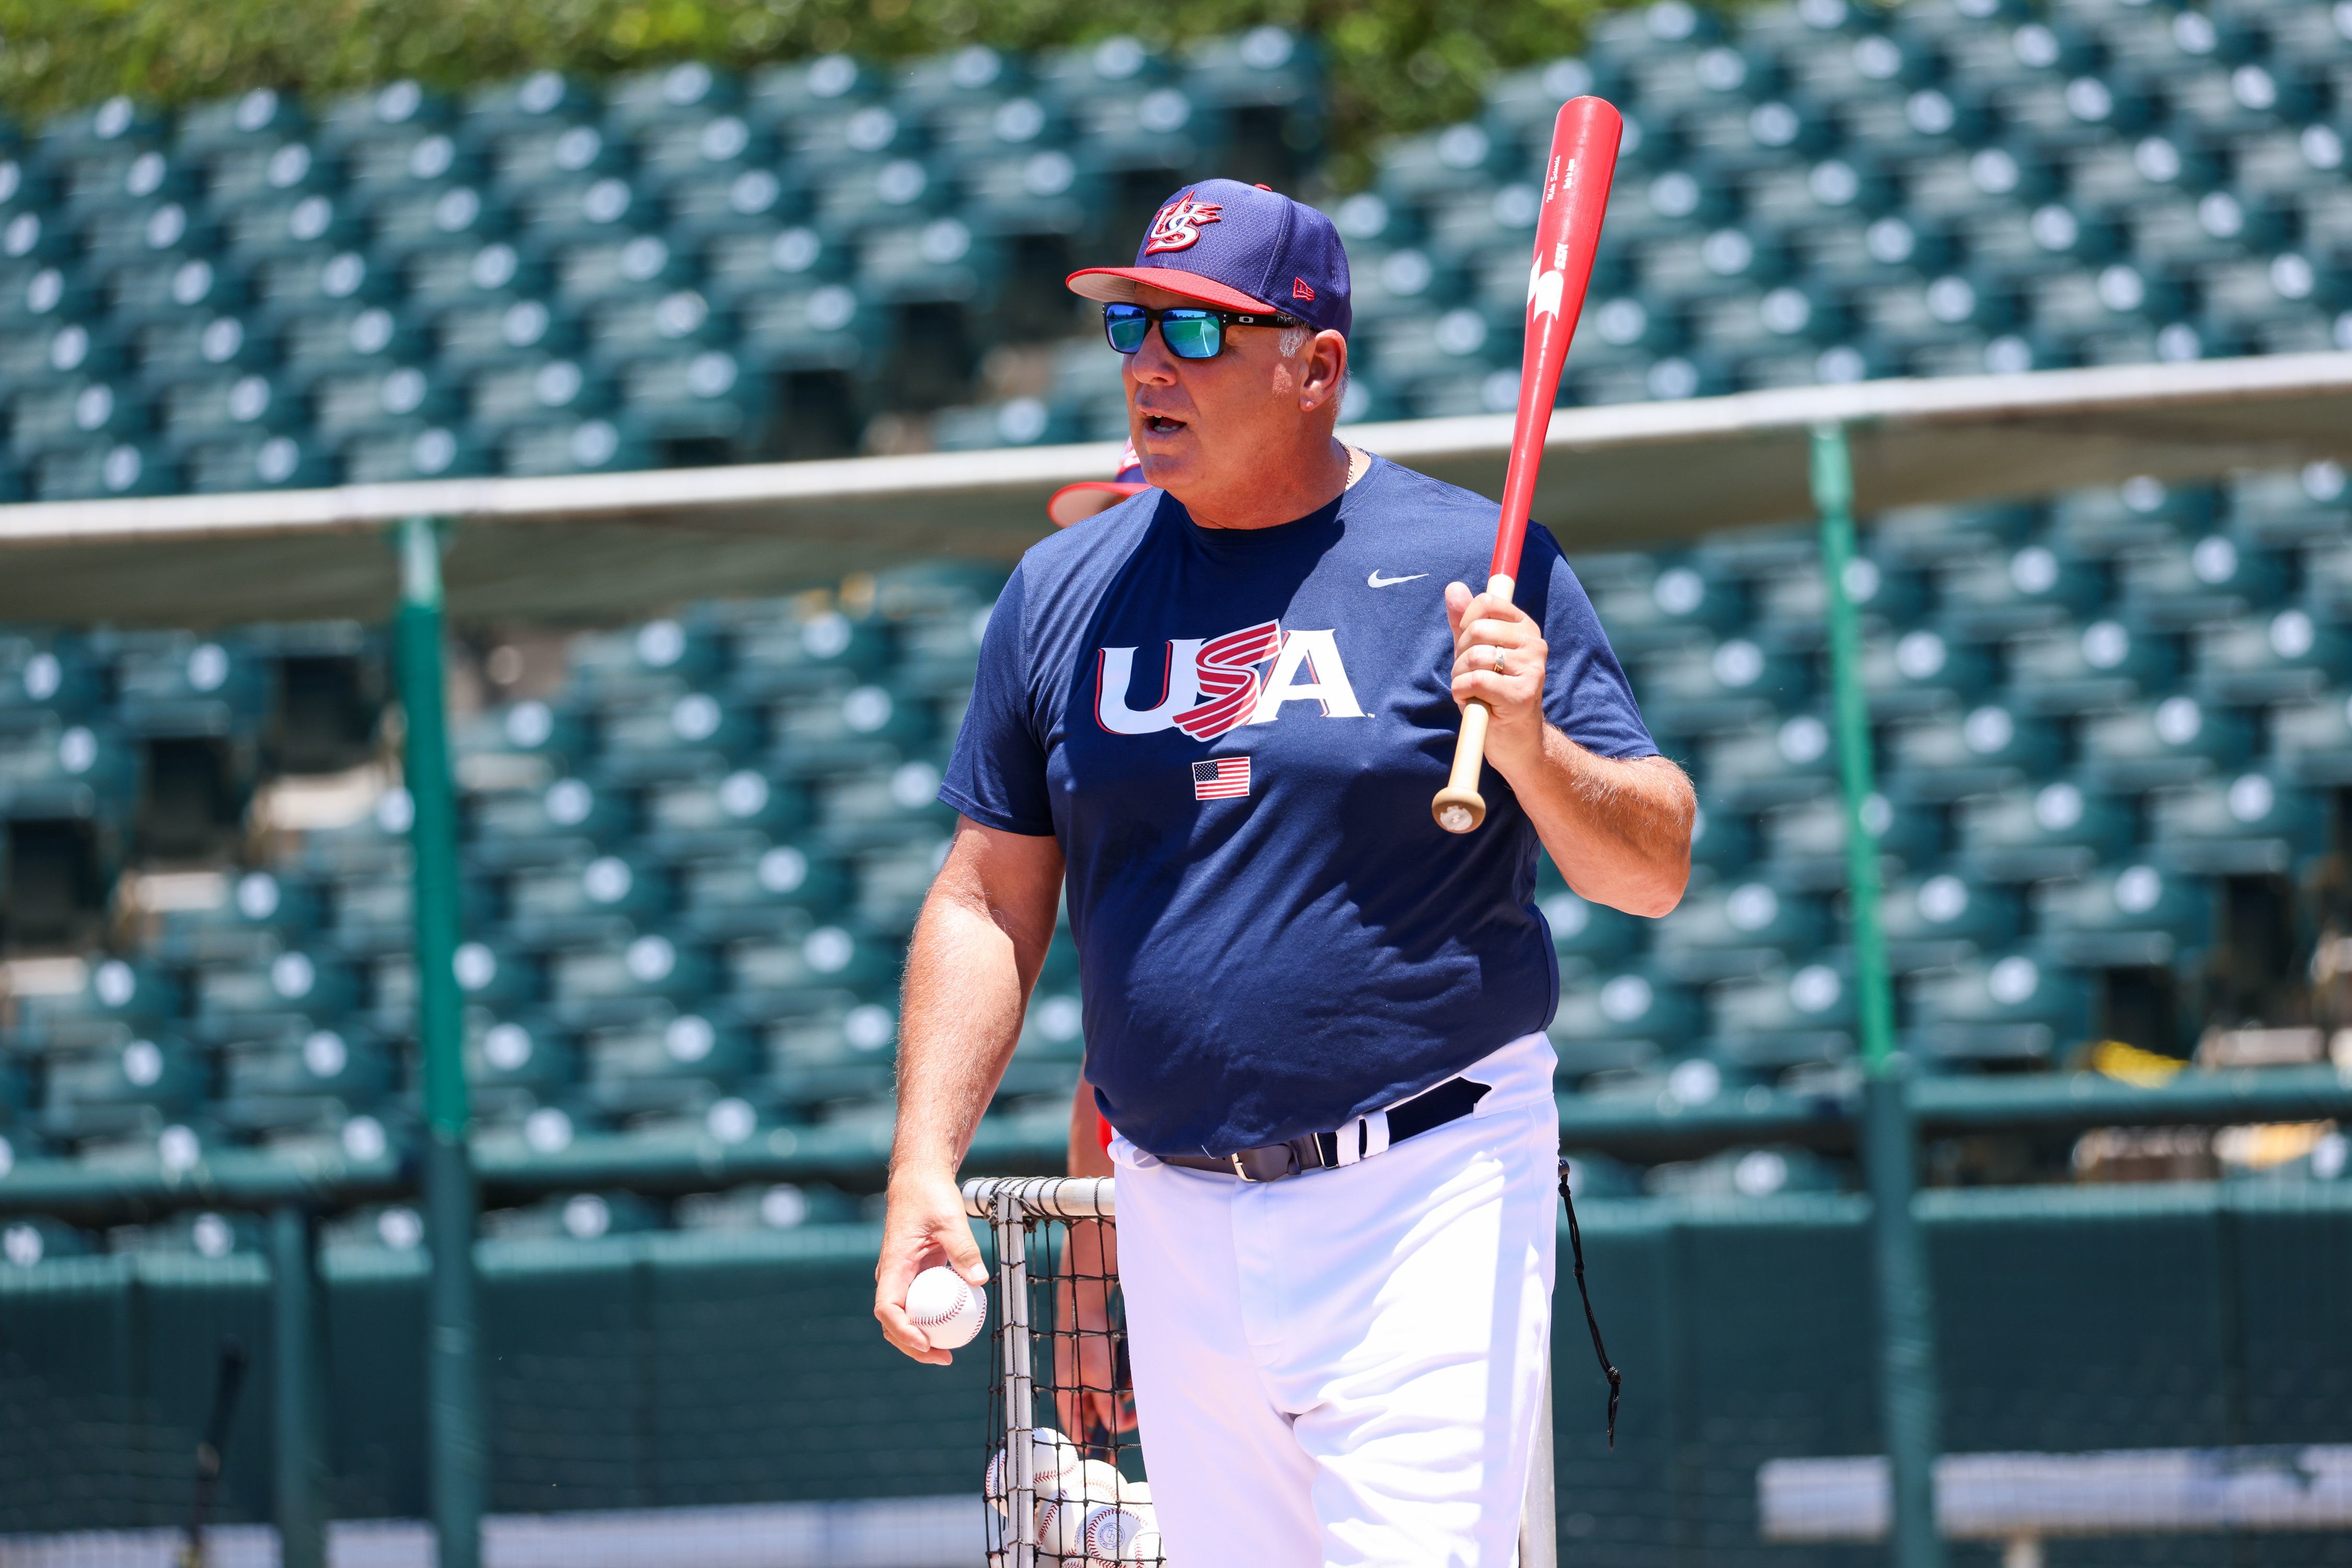 Mike Scioscia vying for Olympics gold as United States baseball manager